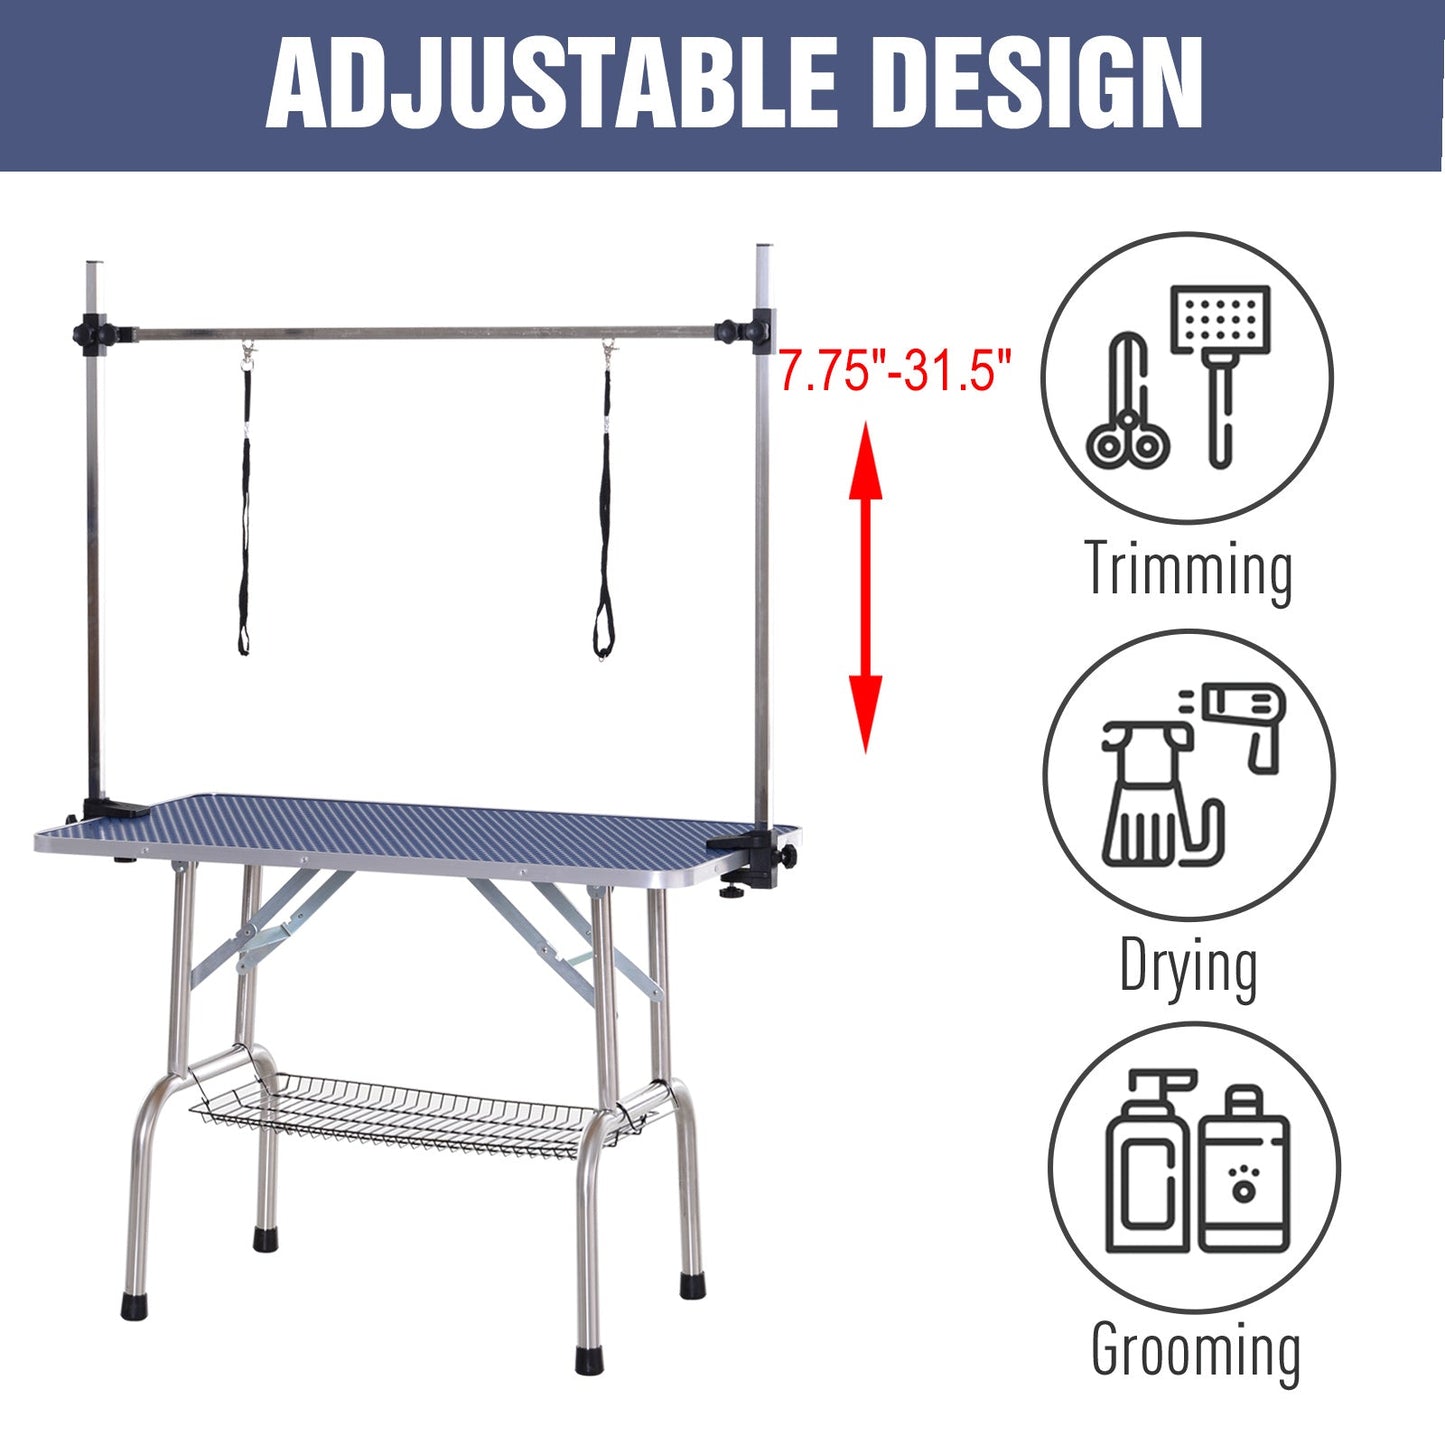 Adjustable Dog Grooming Table Rubber Top 2 Safety Slings Mesh Storage Basket Heavy Metal Blue 42.25"x 23.5" x 67" at Gallery Canada